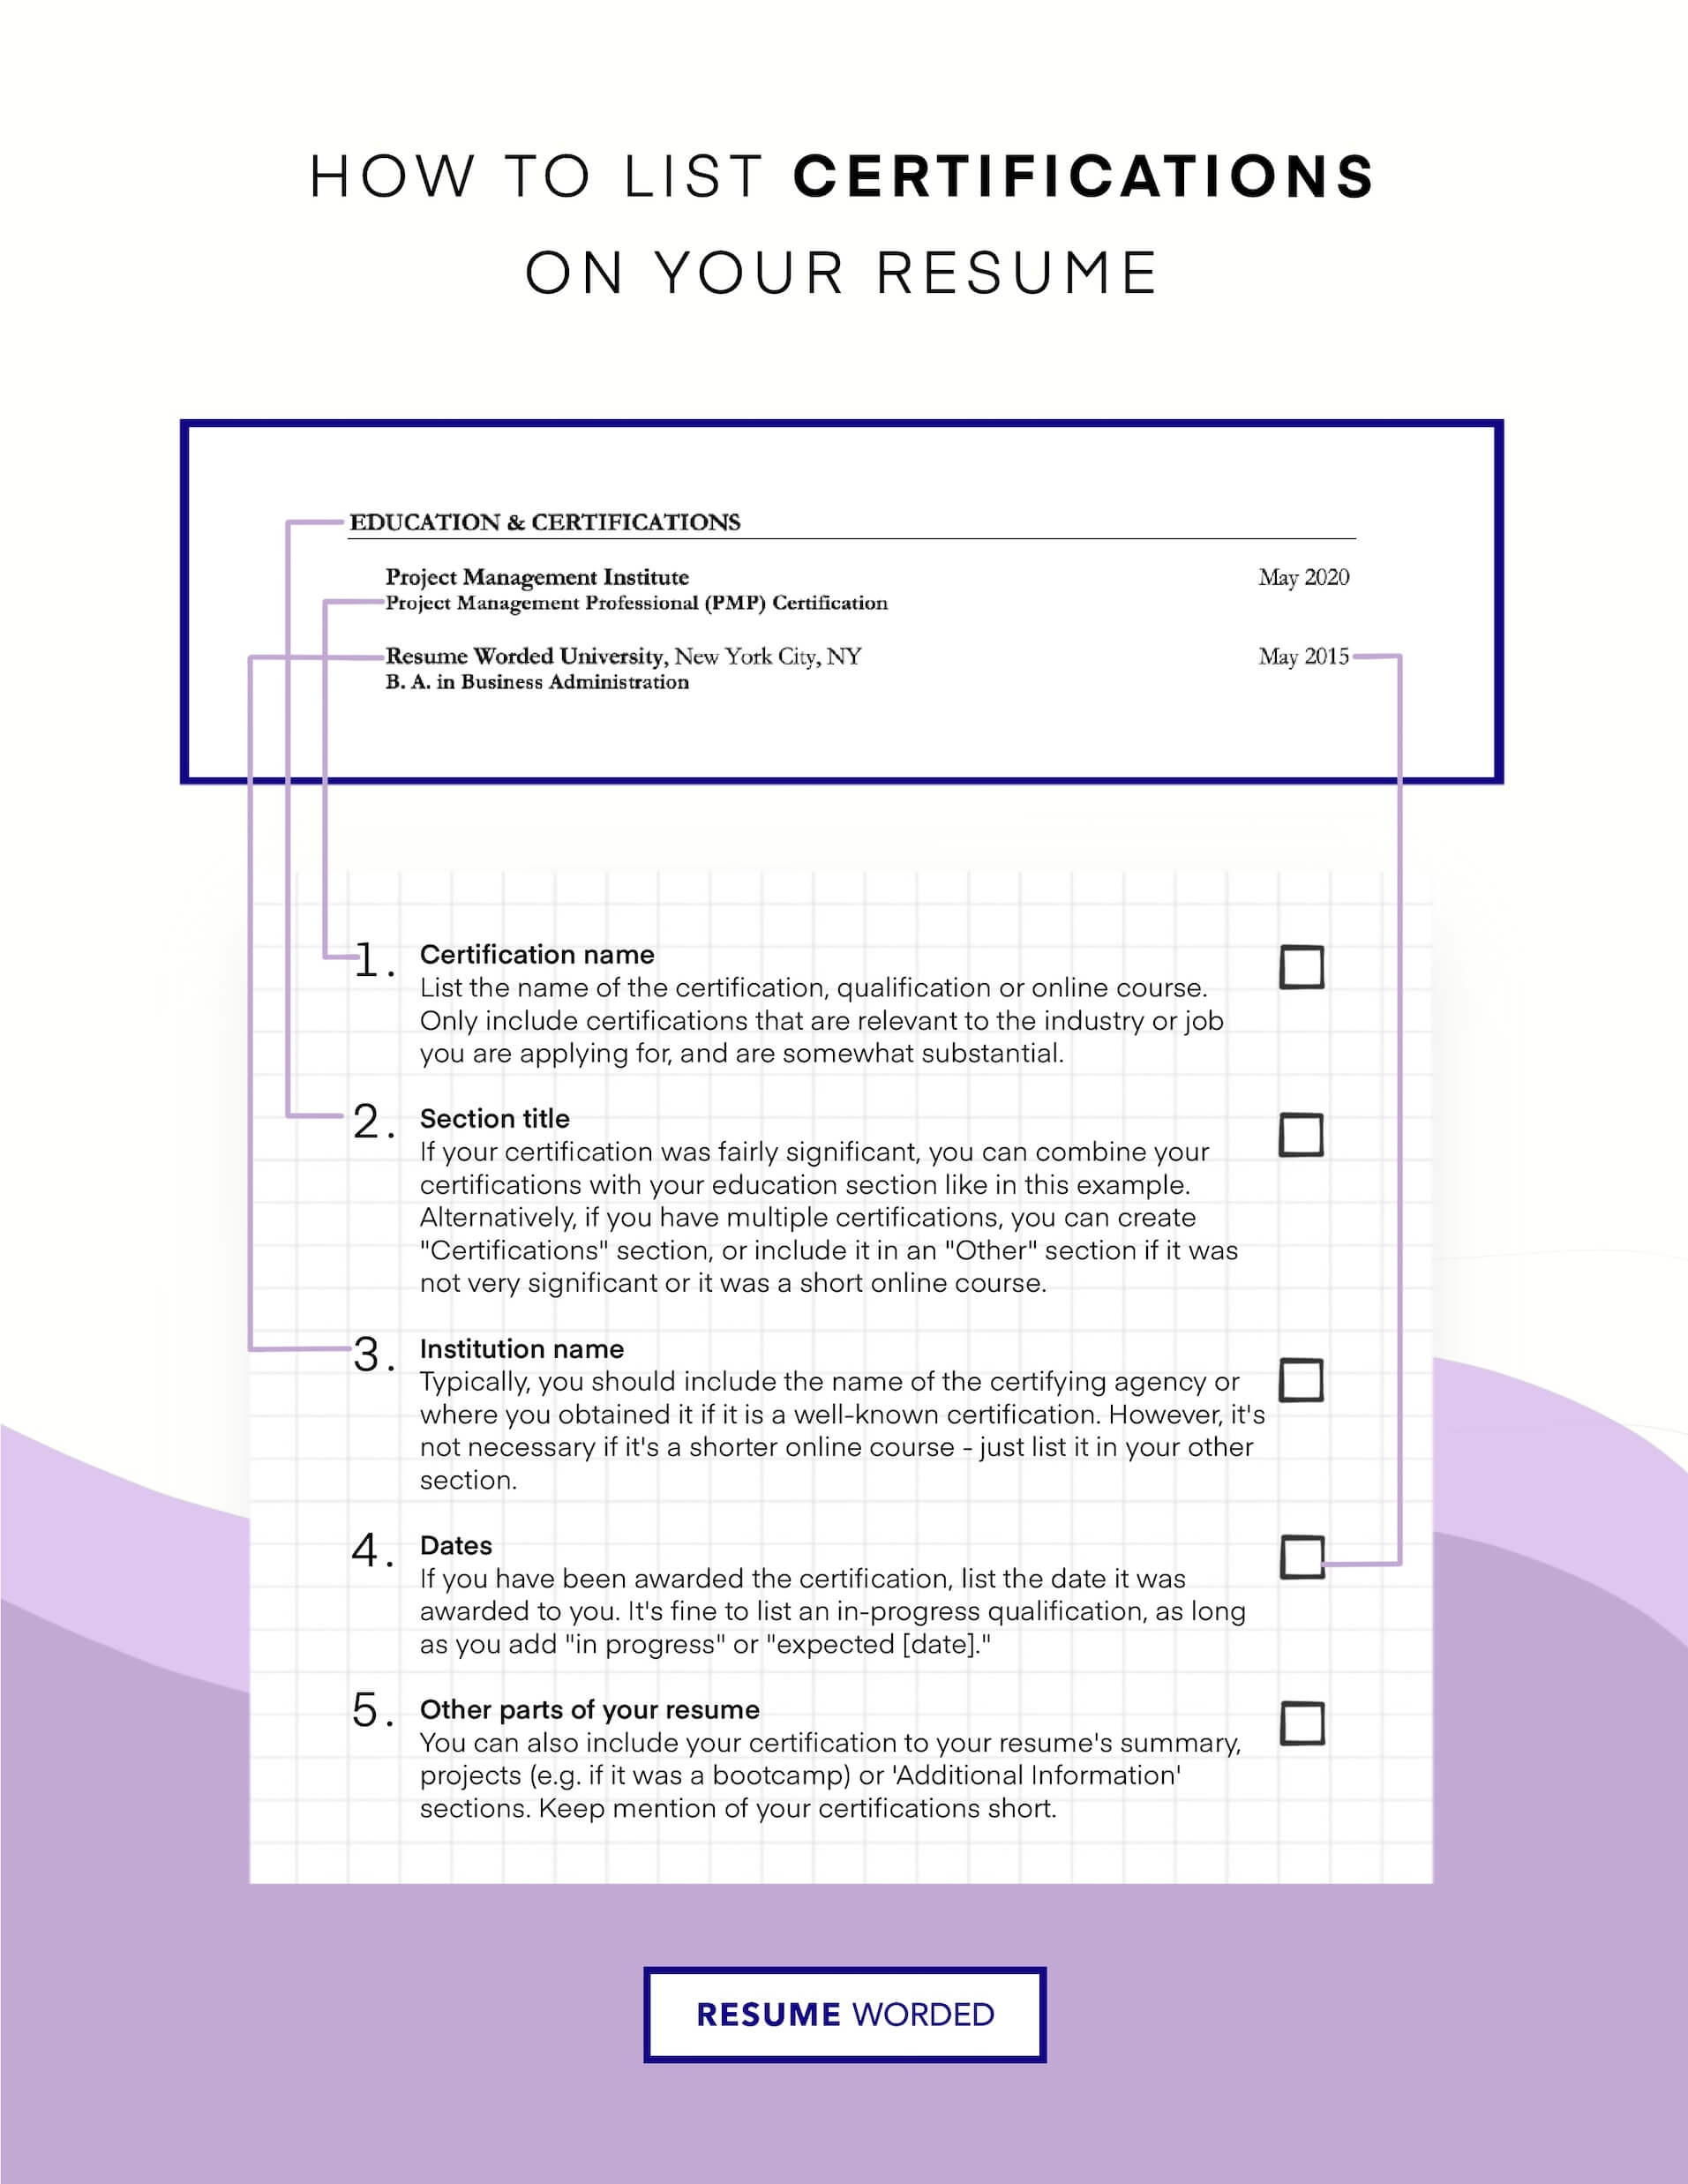 Include transactional-law-related certifications. - Transactional Attorney Resume